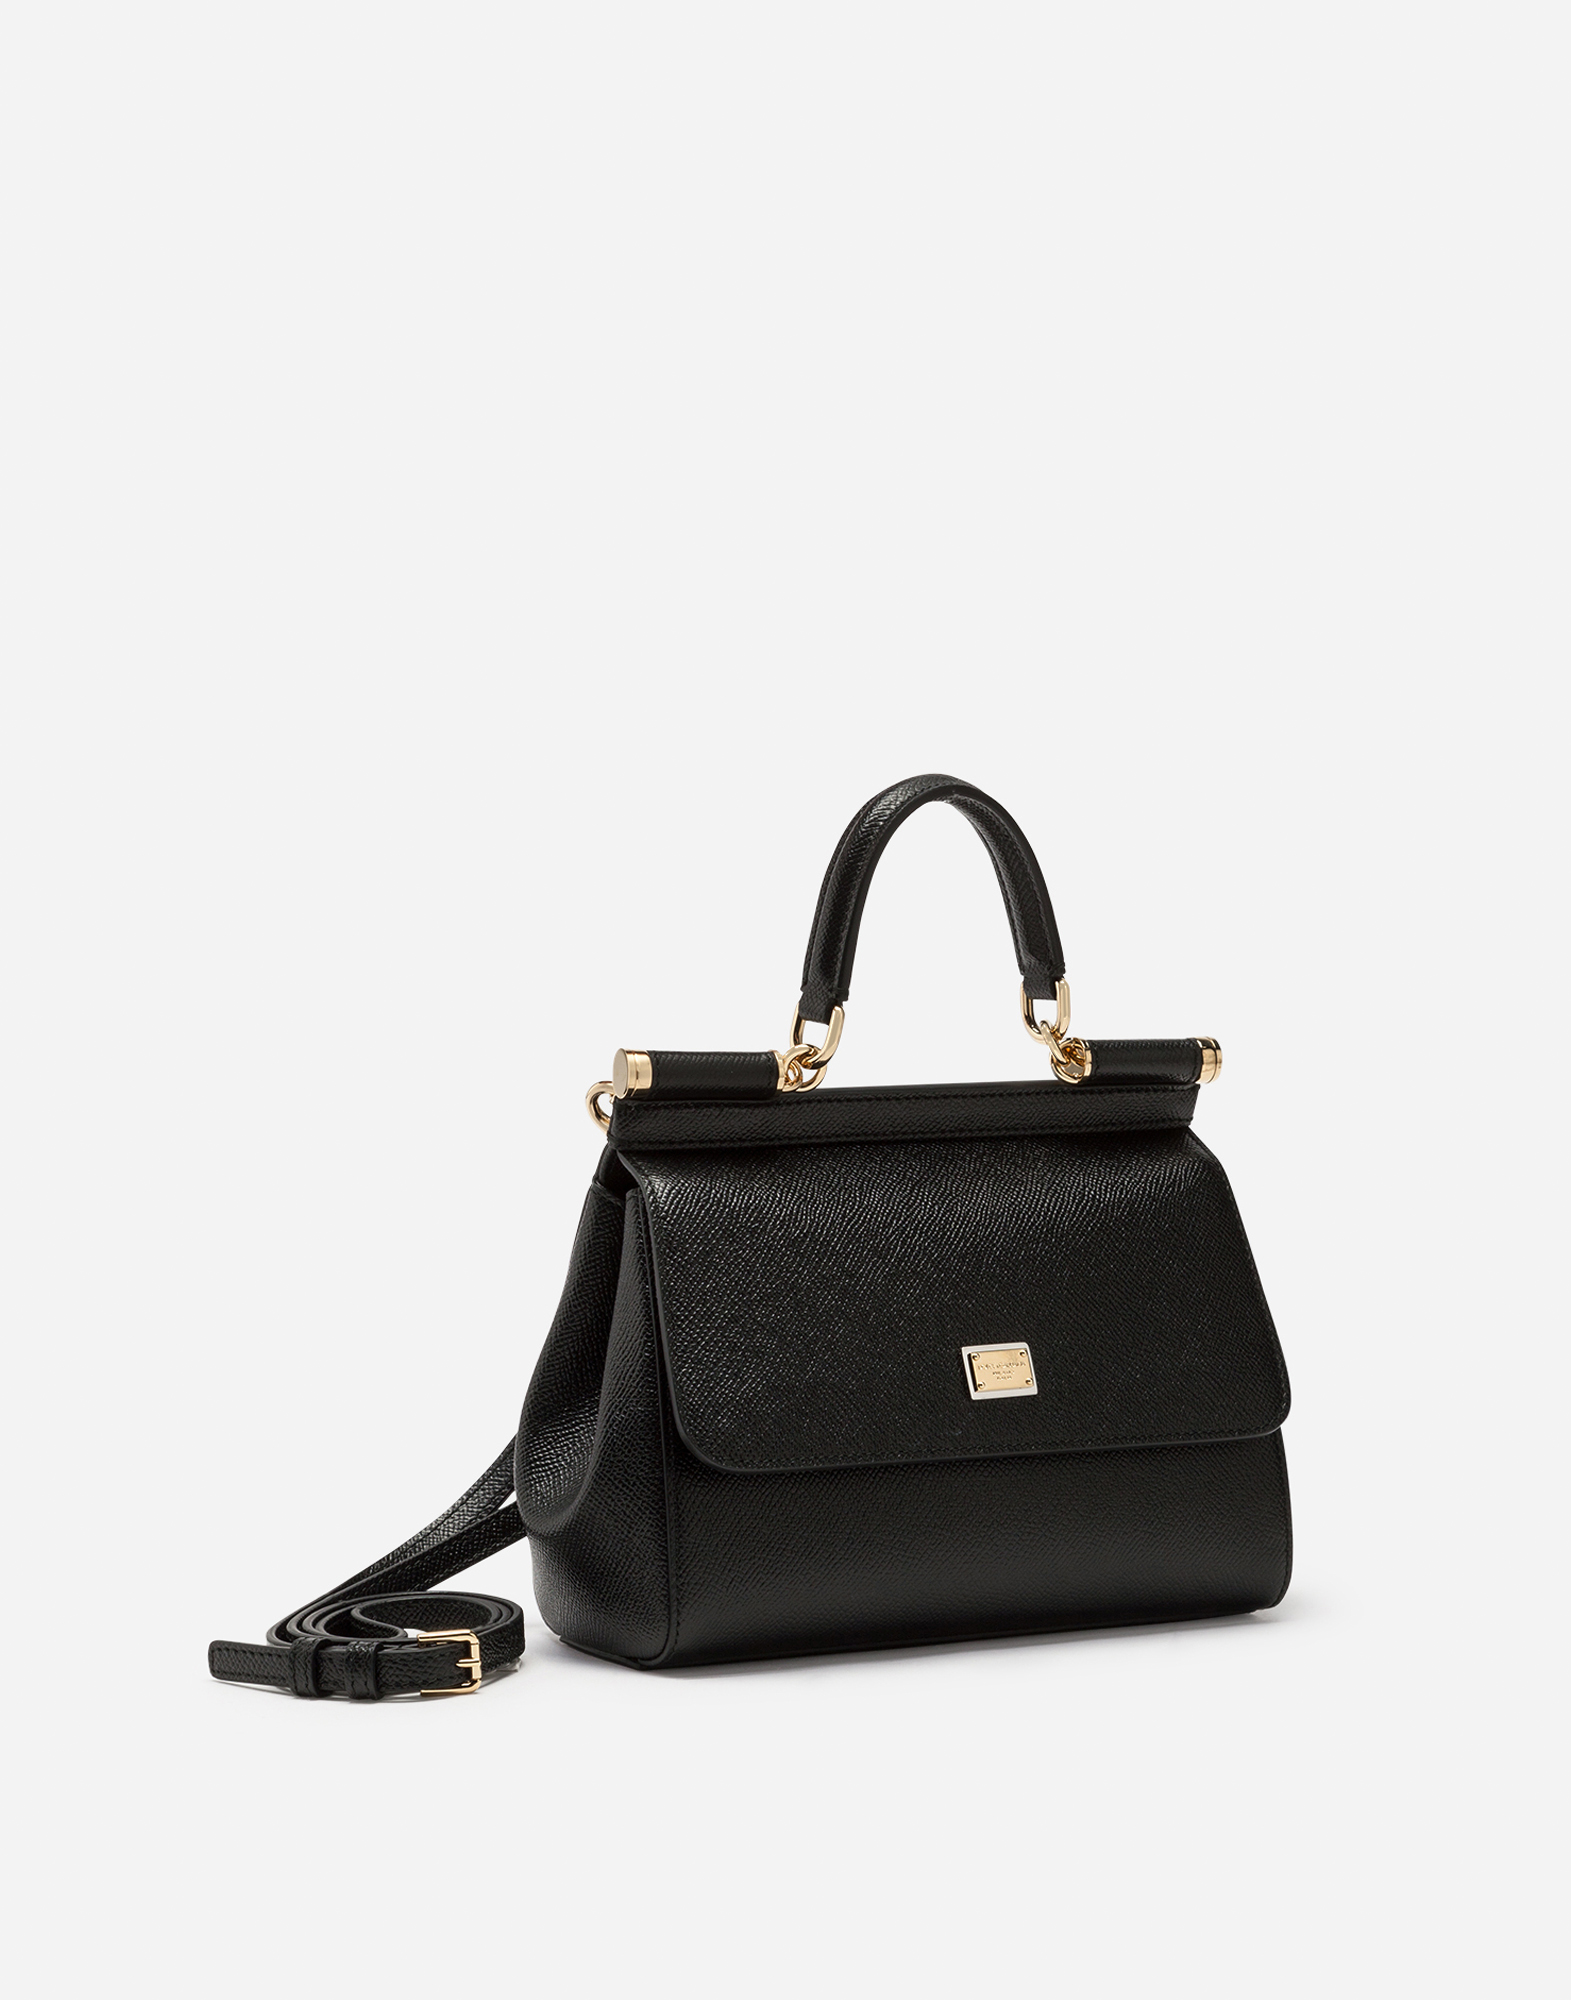 Dolce & Gabbana Small Dauphine Leather Sicily Bag - Black